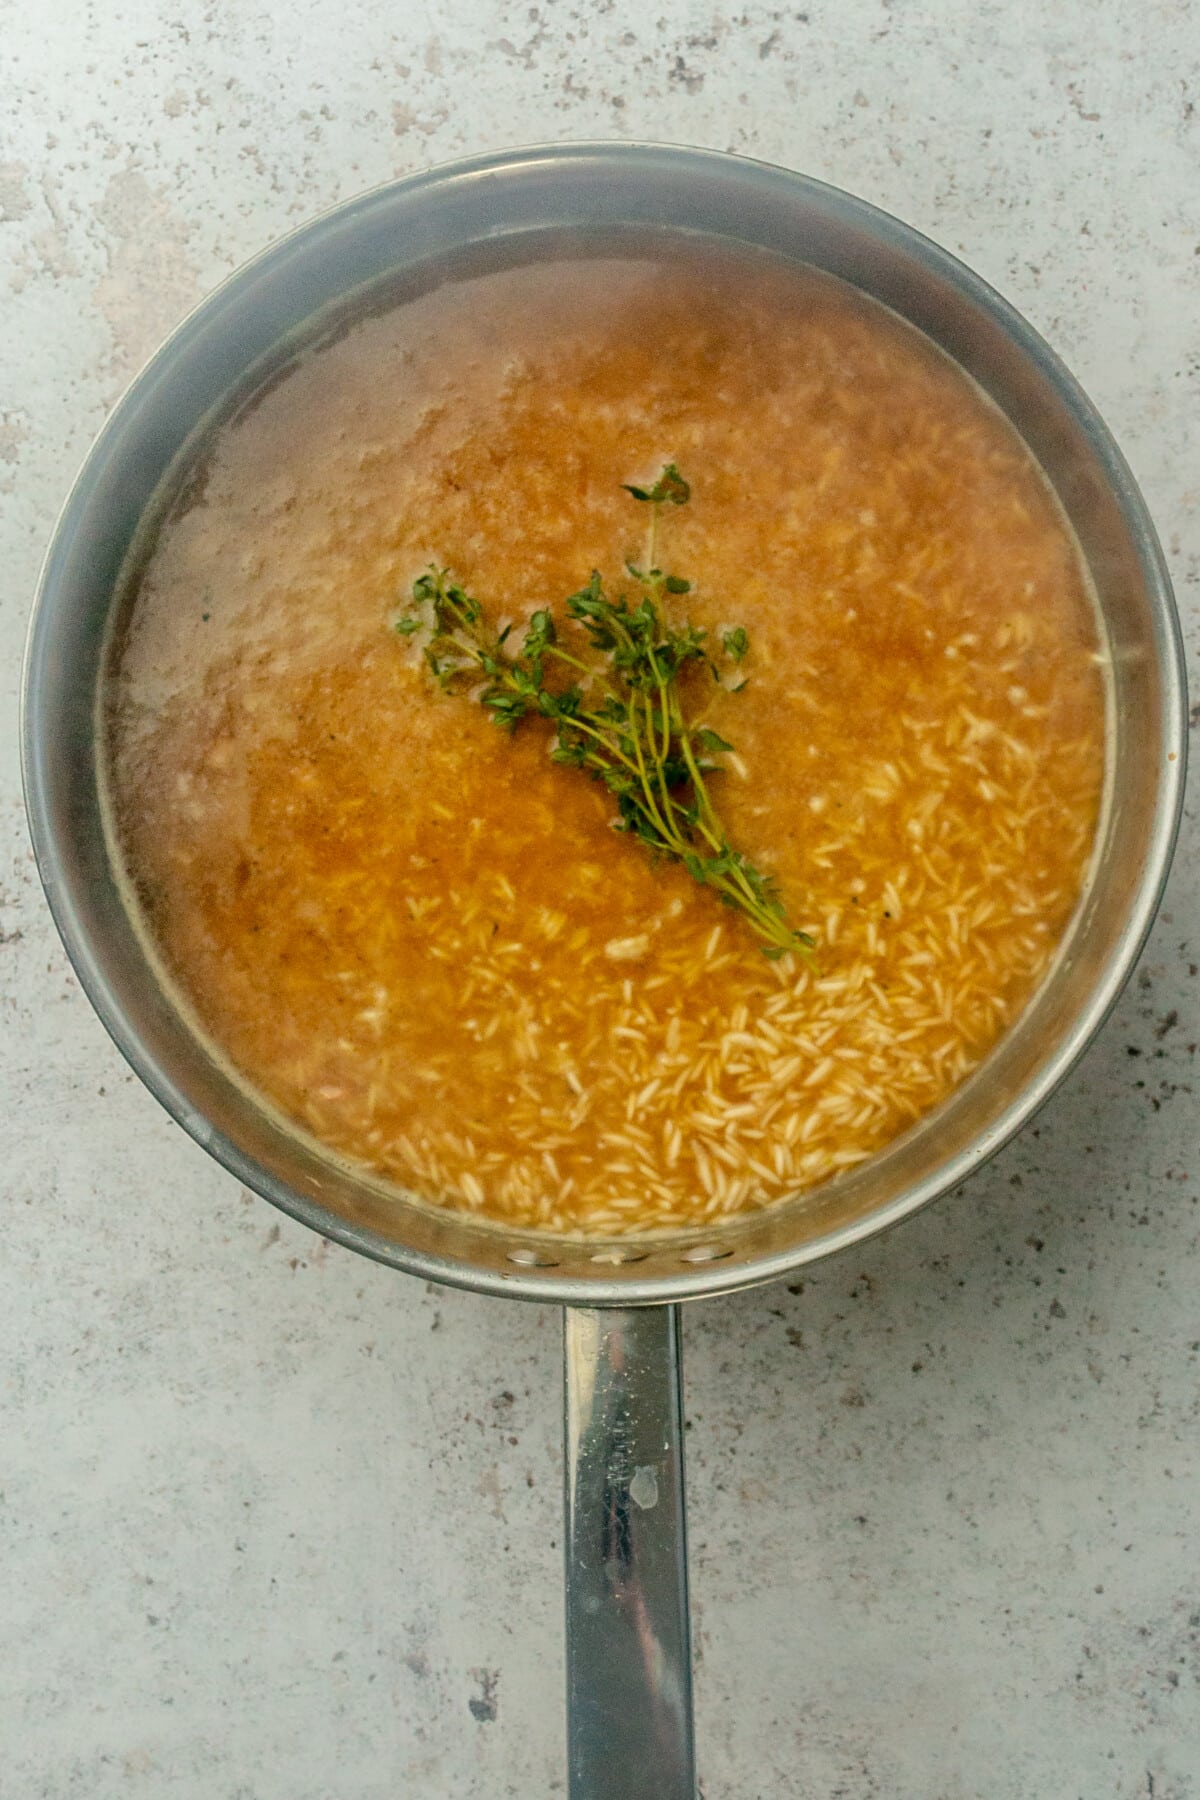 Thyme sprigs sit on top of rice and chicken stock in a stainless steel frying pan on a light grey surface.